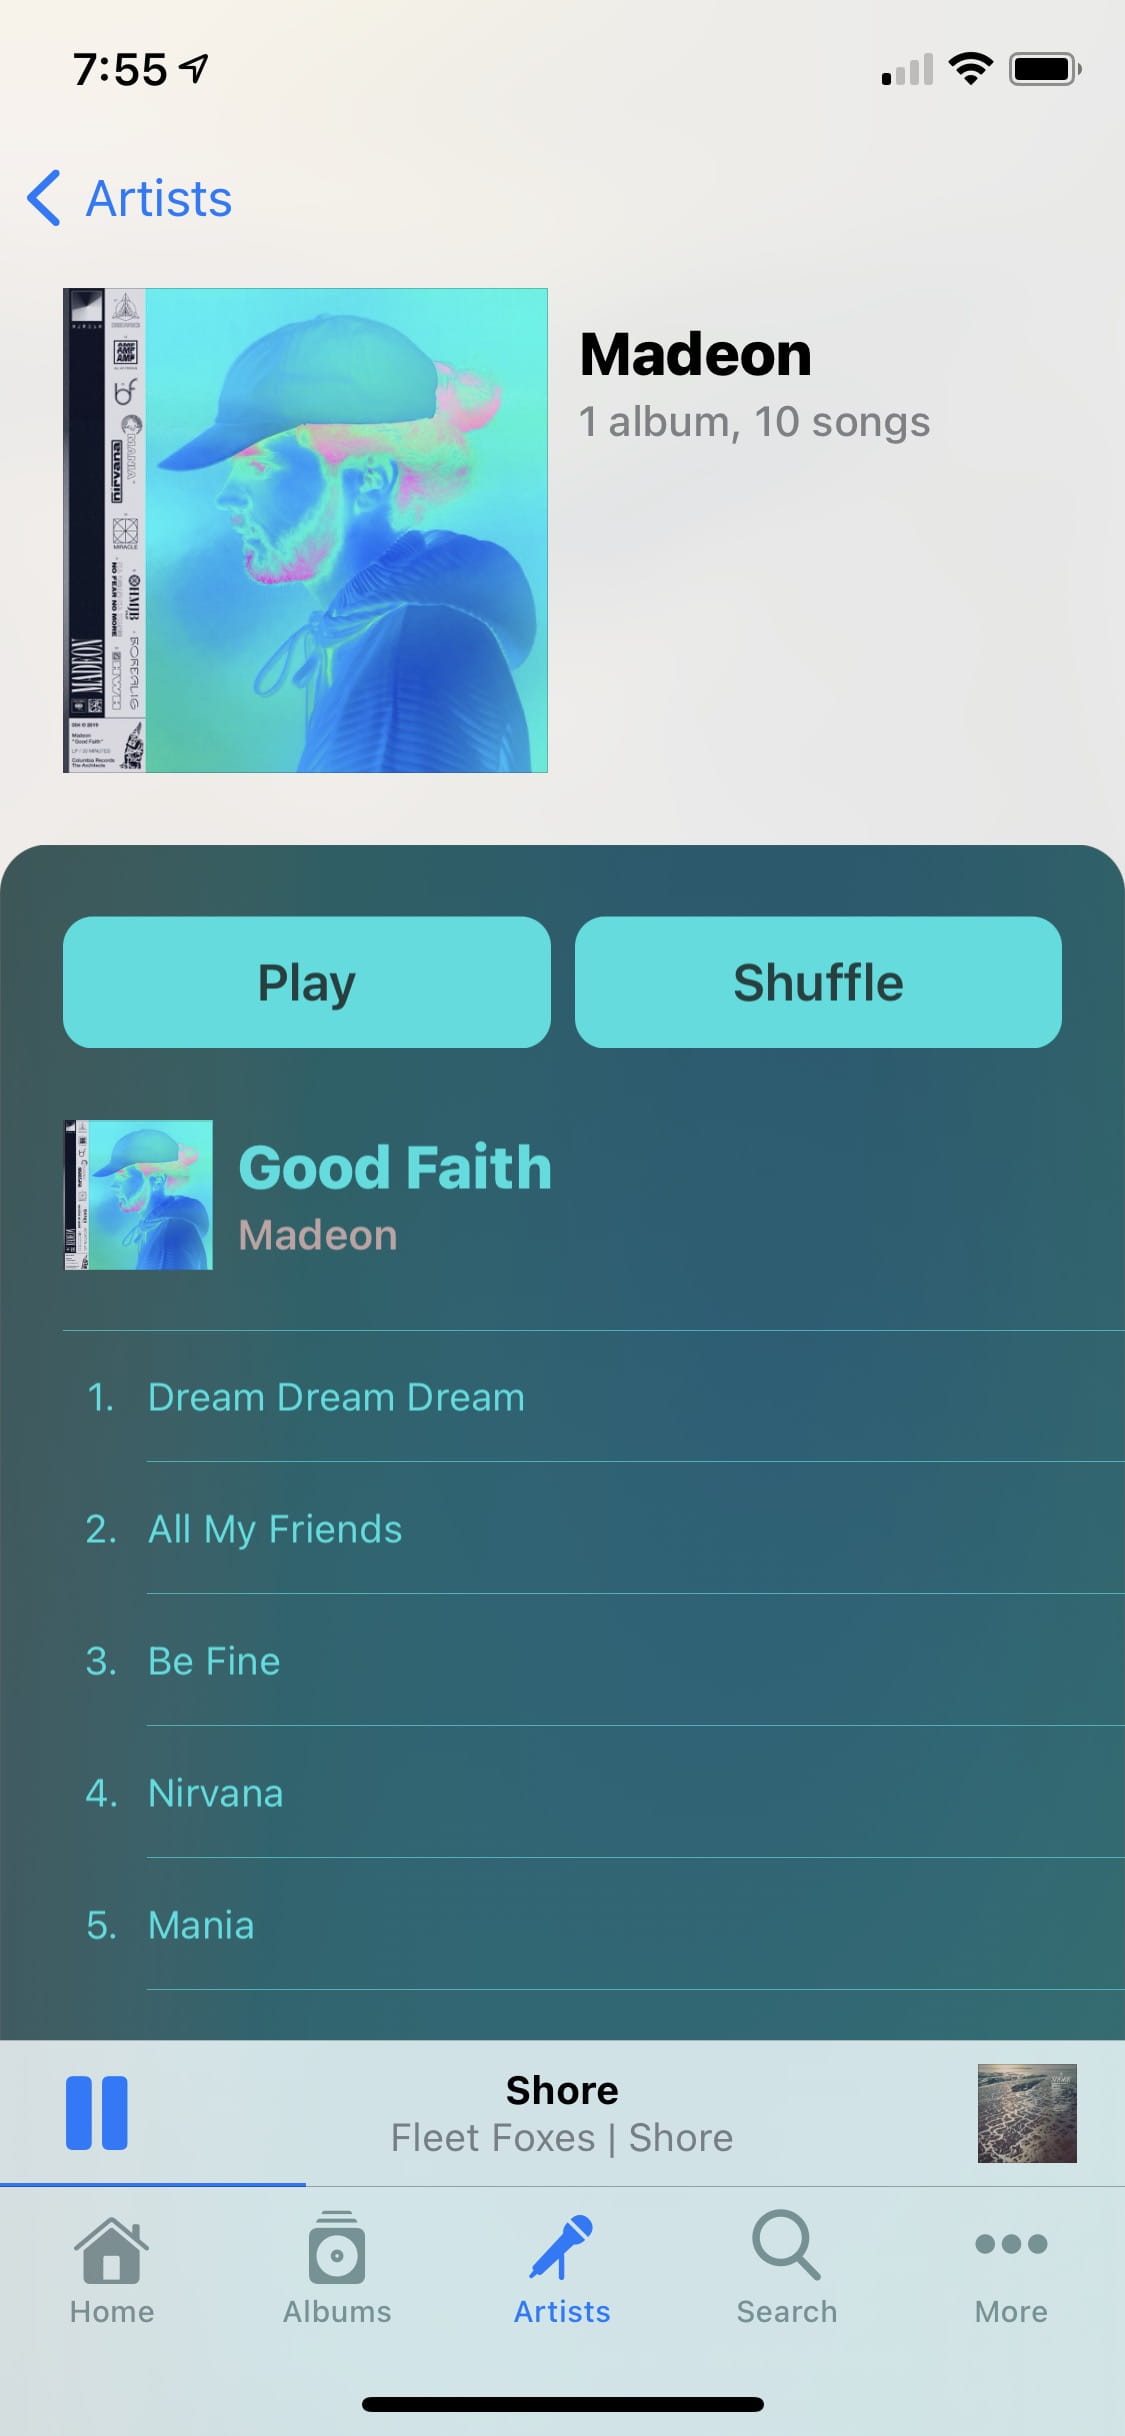 Image of the album view with a predominantly blue record